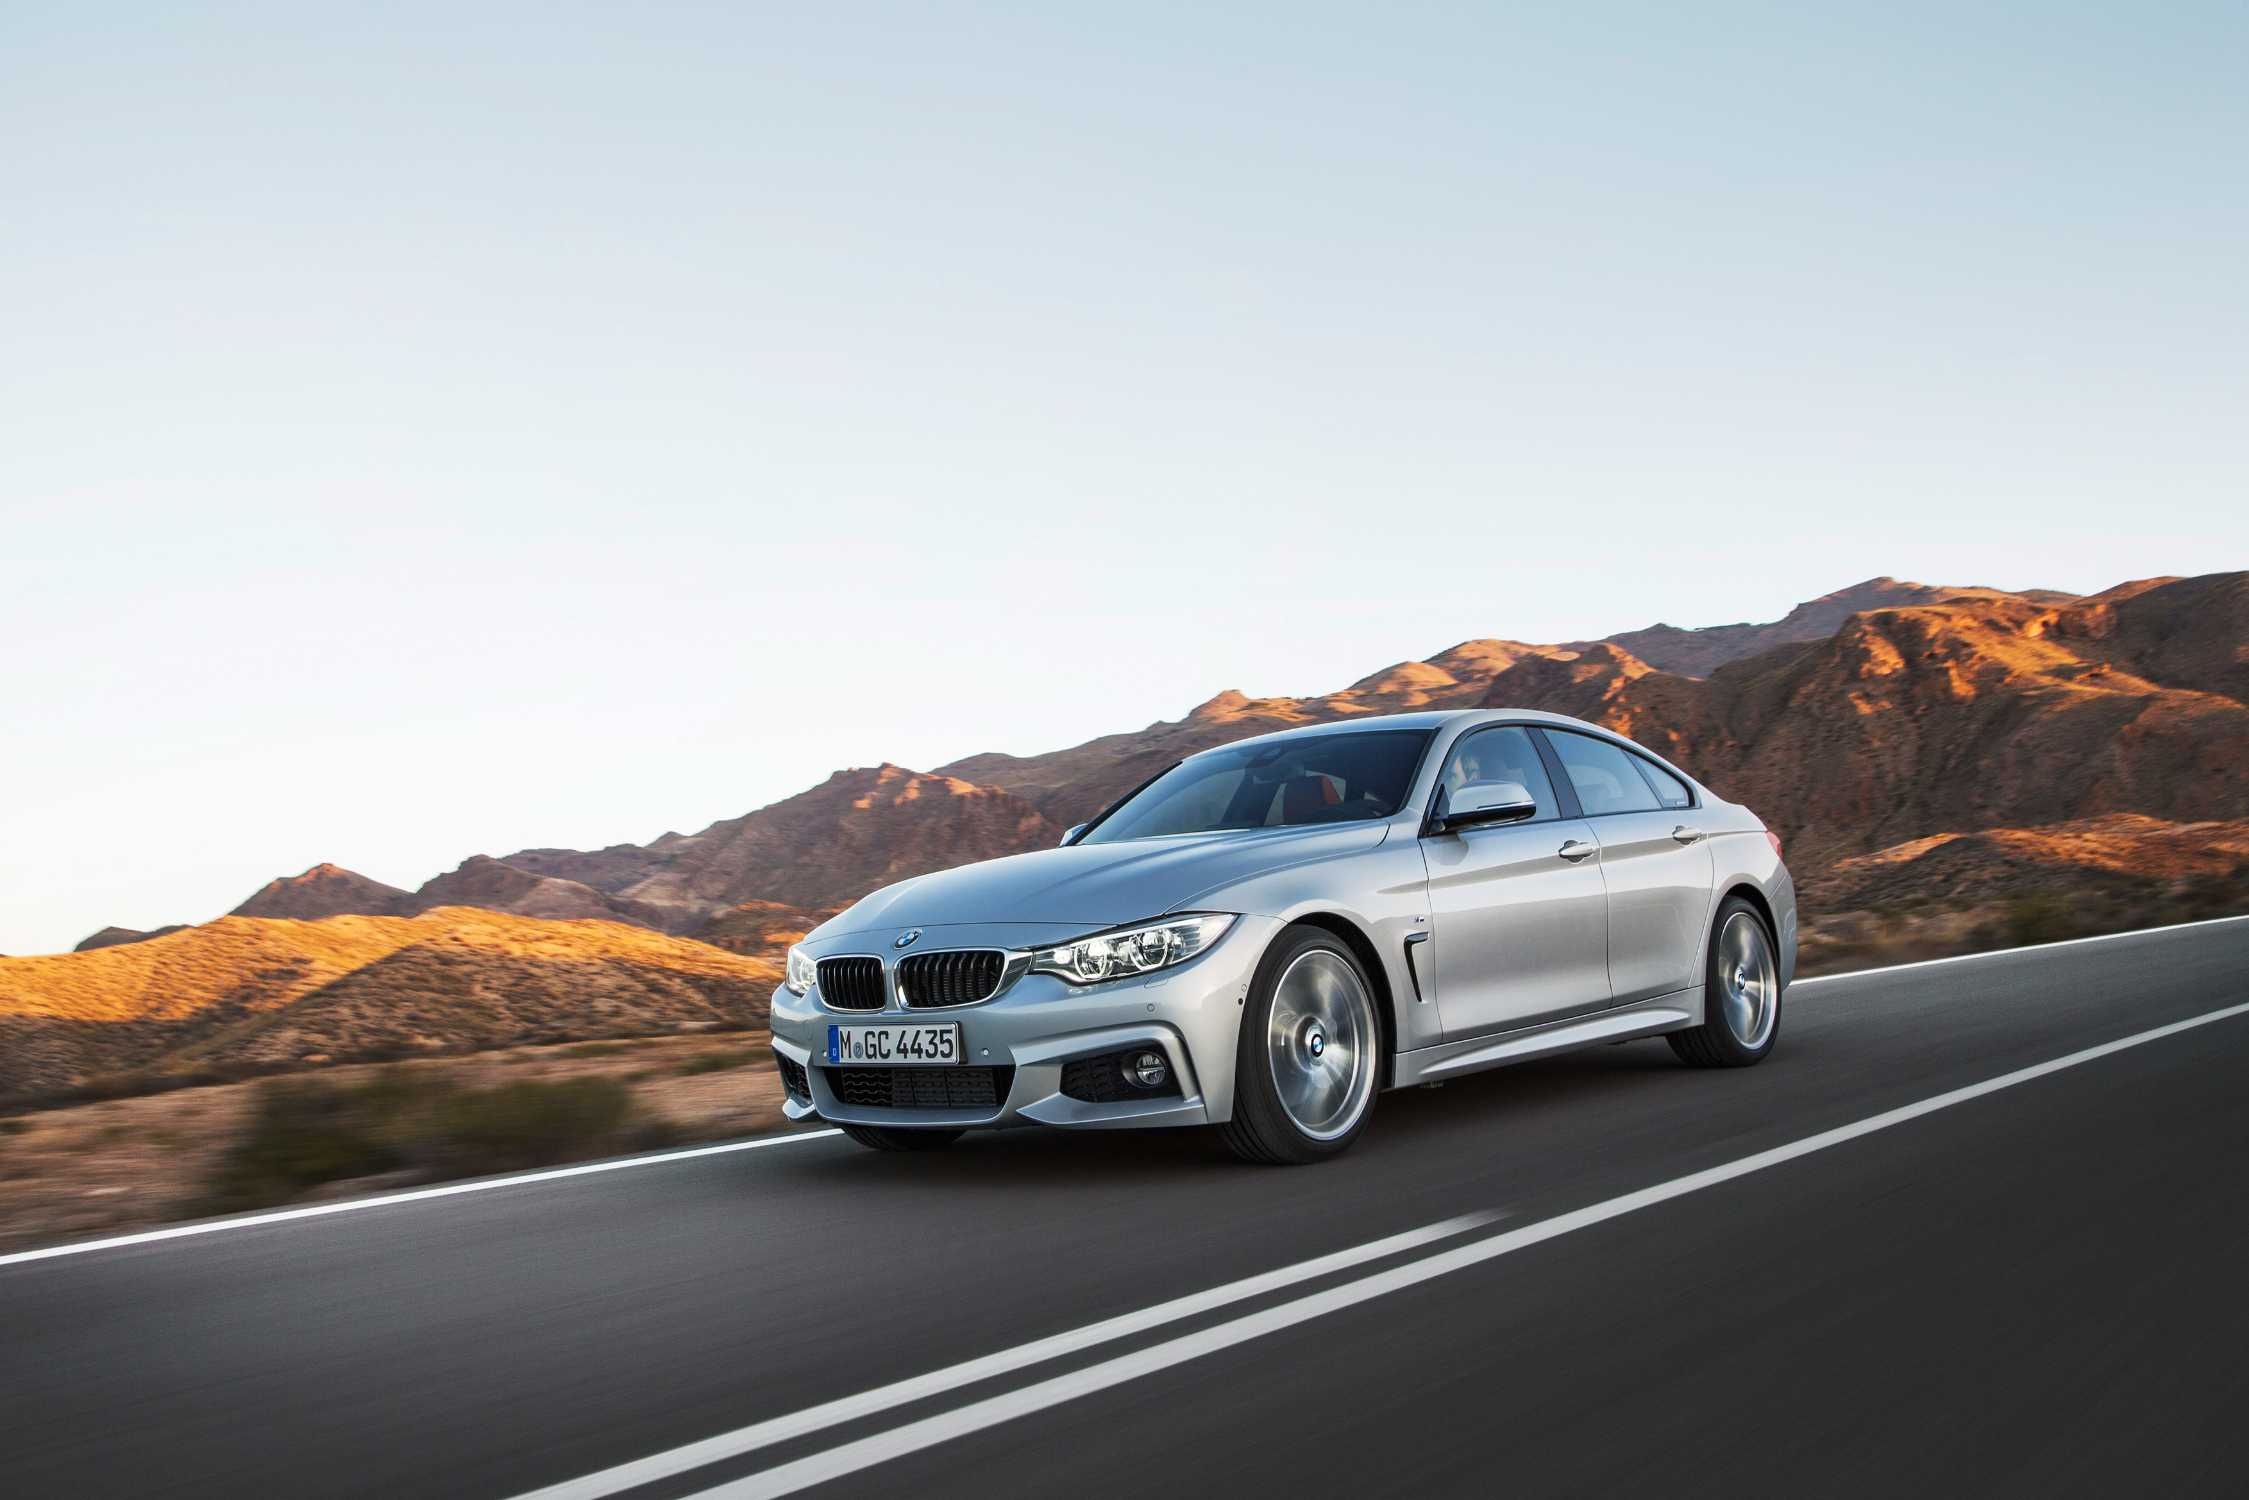 BMW 4 Series Gran Coupe, 2015 model, Luxury comfort, Unmatched style, 2250x1500 HD Desktop